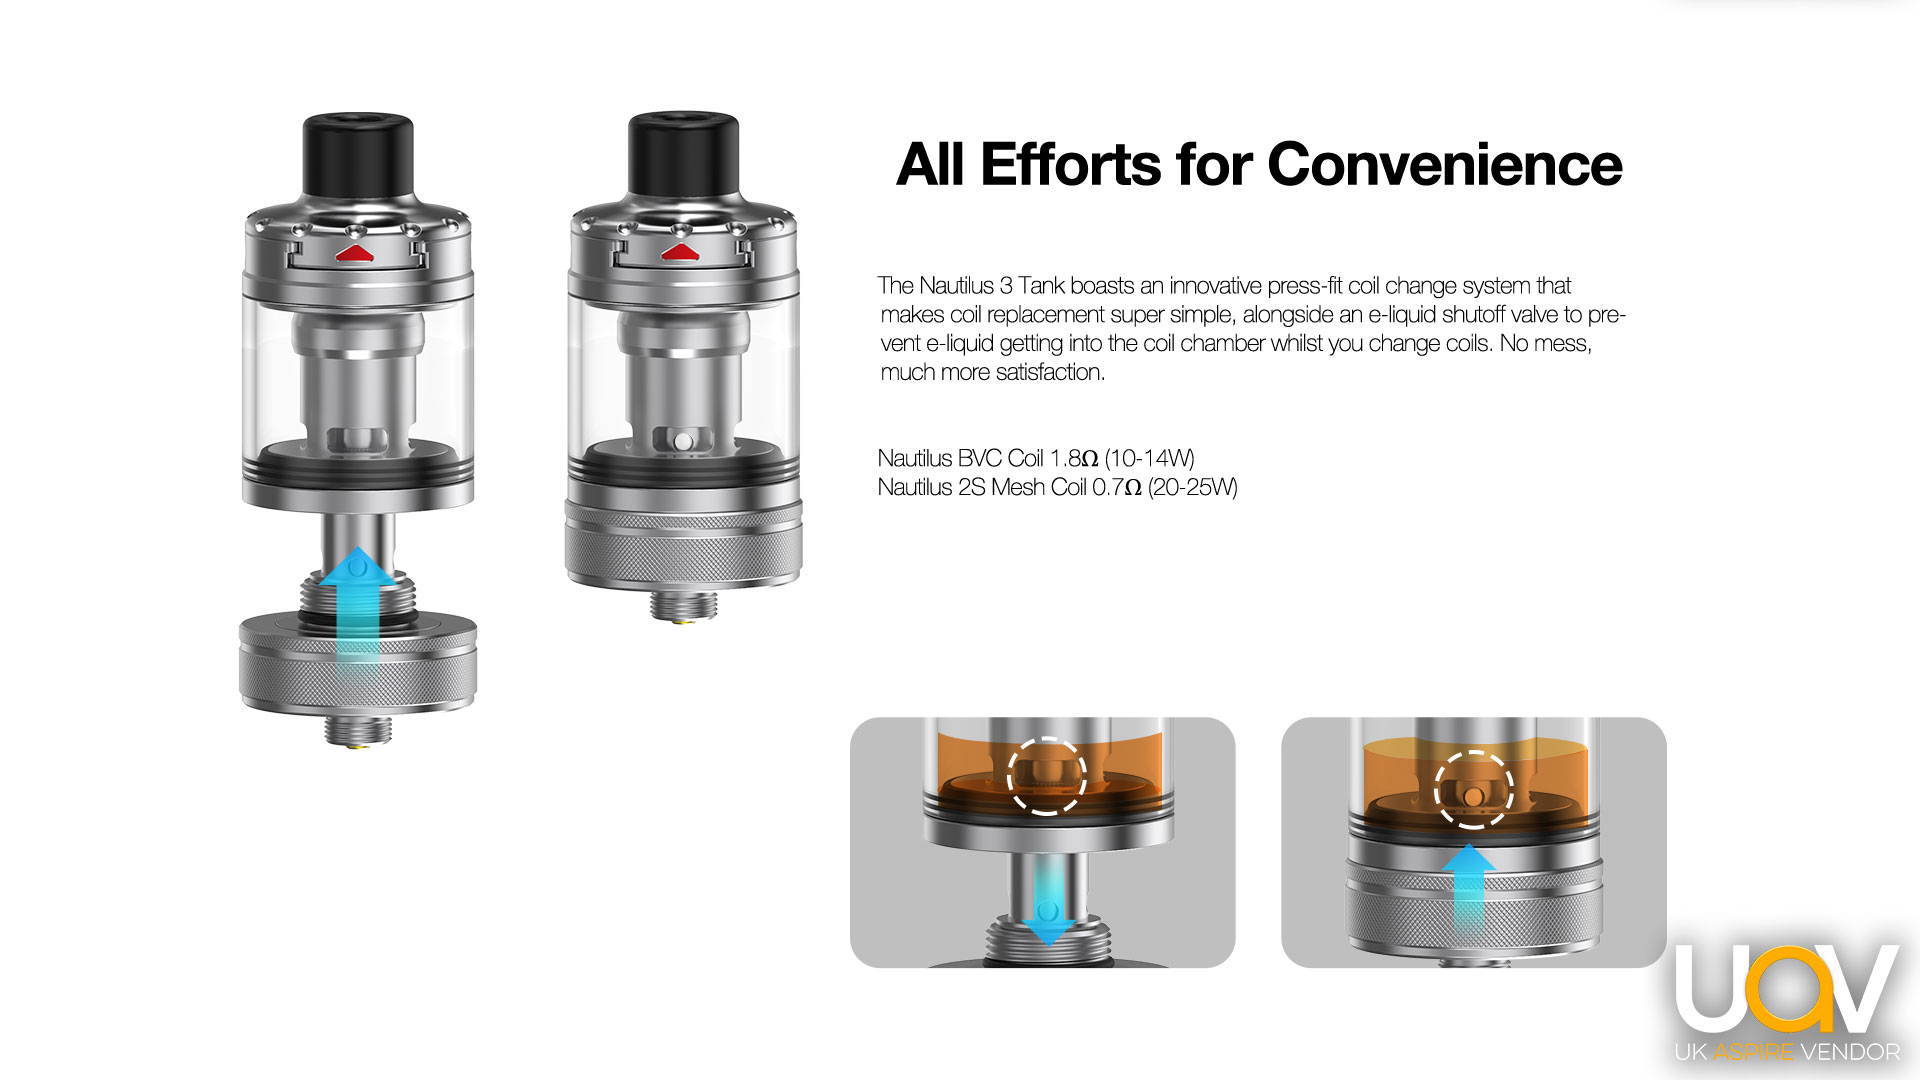  All Efforts for Convenience  The Nautilus 3 Tank boasts an innovative press-fit coil change system that makes coil replacement super simple, alongside an e-liquid shutoff valve to prevent e-liquid getting into the coil chamber whilst you change coils. No mess, much more satisfaction.   Nautilus BVC Coil 1.8Ω (10-14W)  Nautilus 2S Mesh Coil 0.7Ω (20-25W)